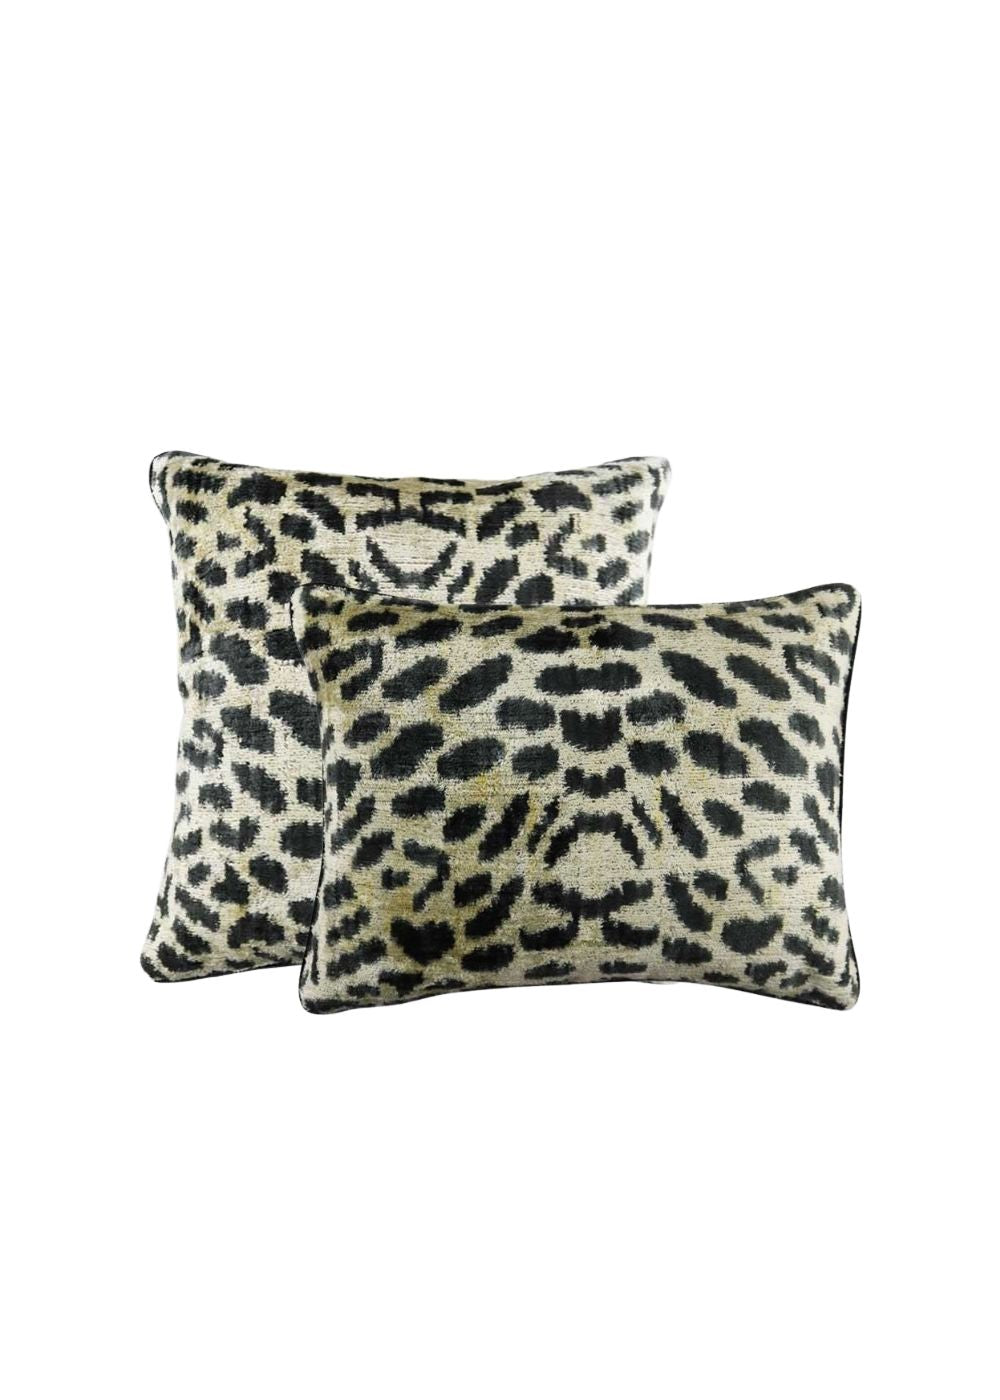 clementine-pillows-ZVPL-1901-both-sizes-combined